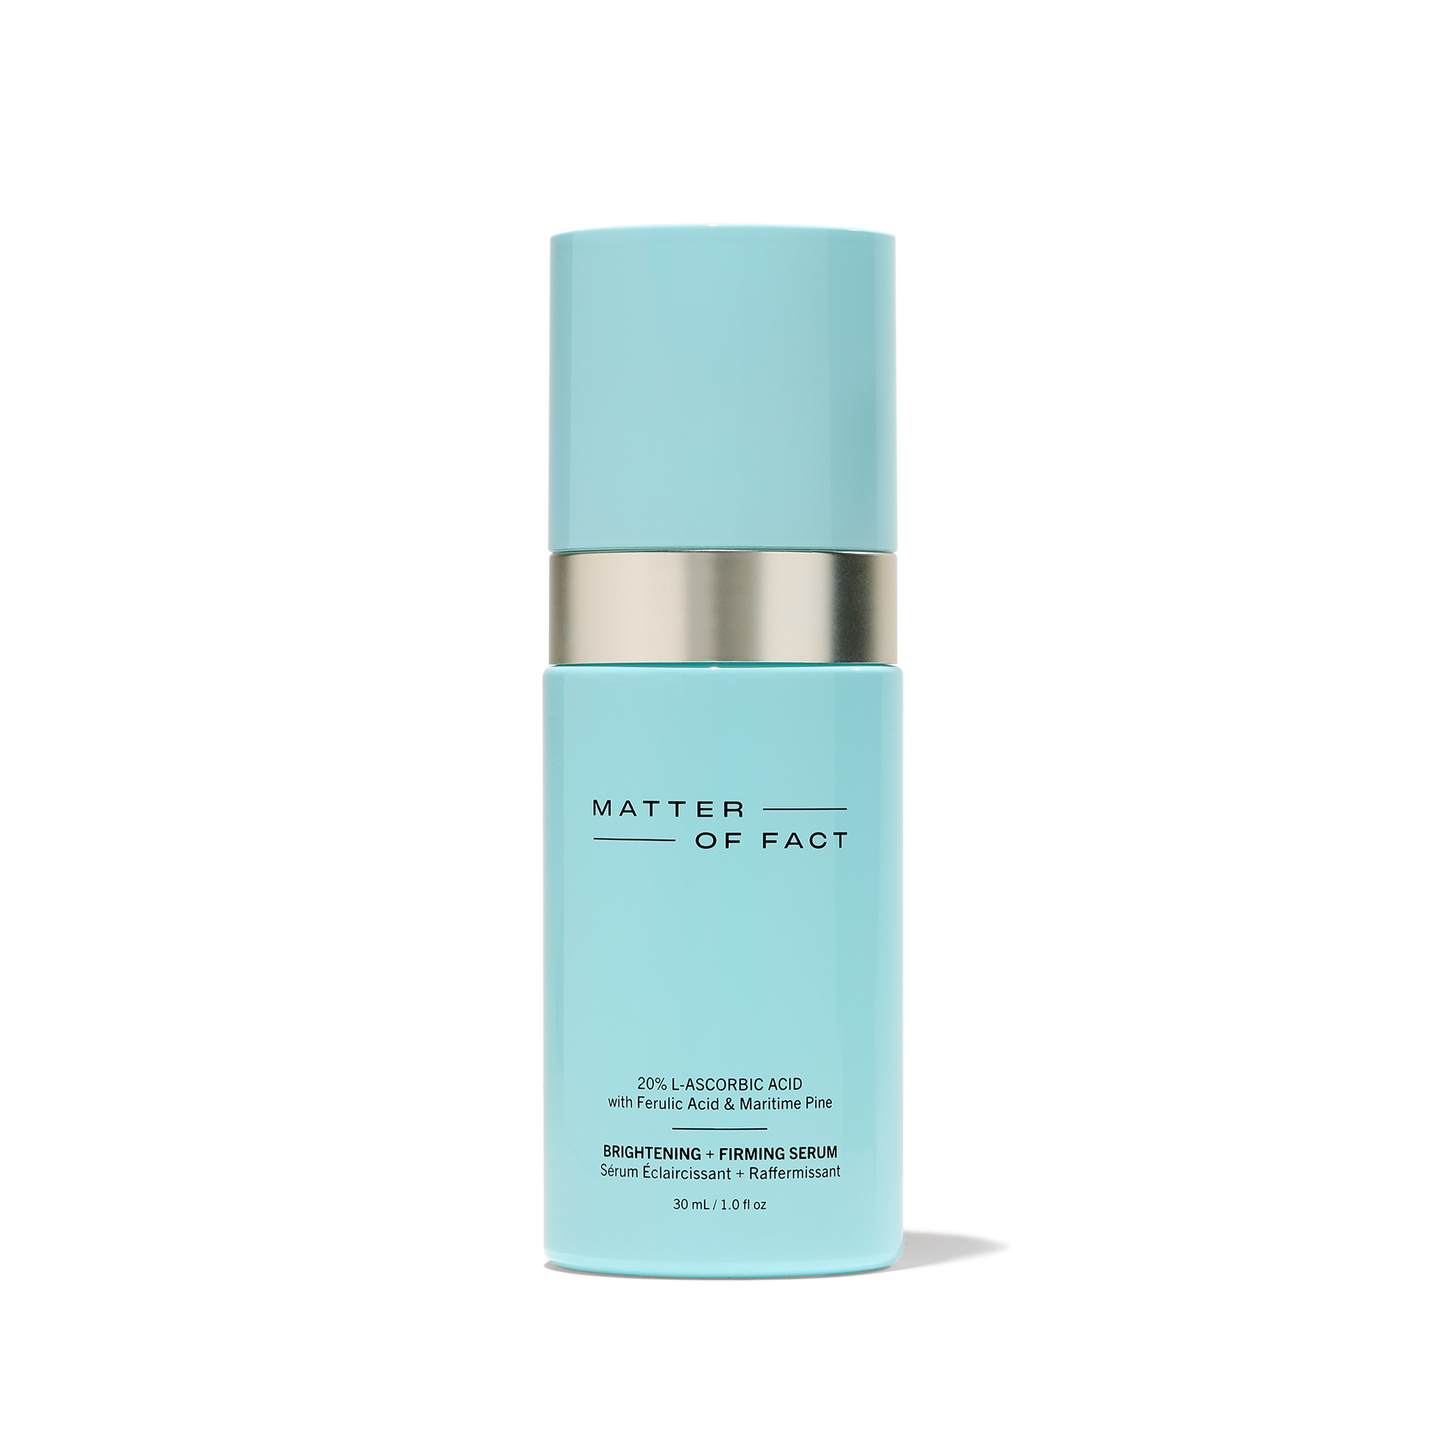 MATTER OF FACT SKINCARE BRIGHTENING AND FIRMING SERUM full-size product 30mL